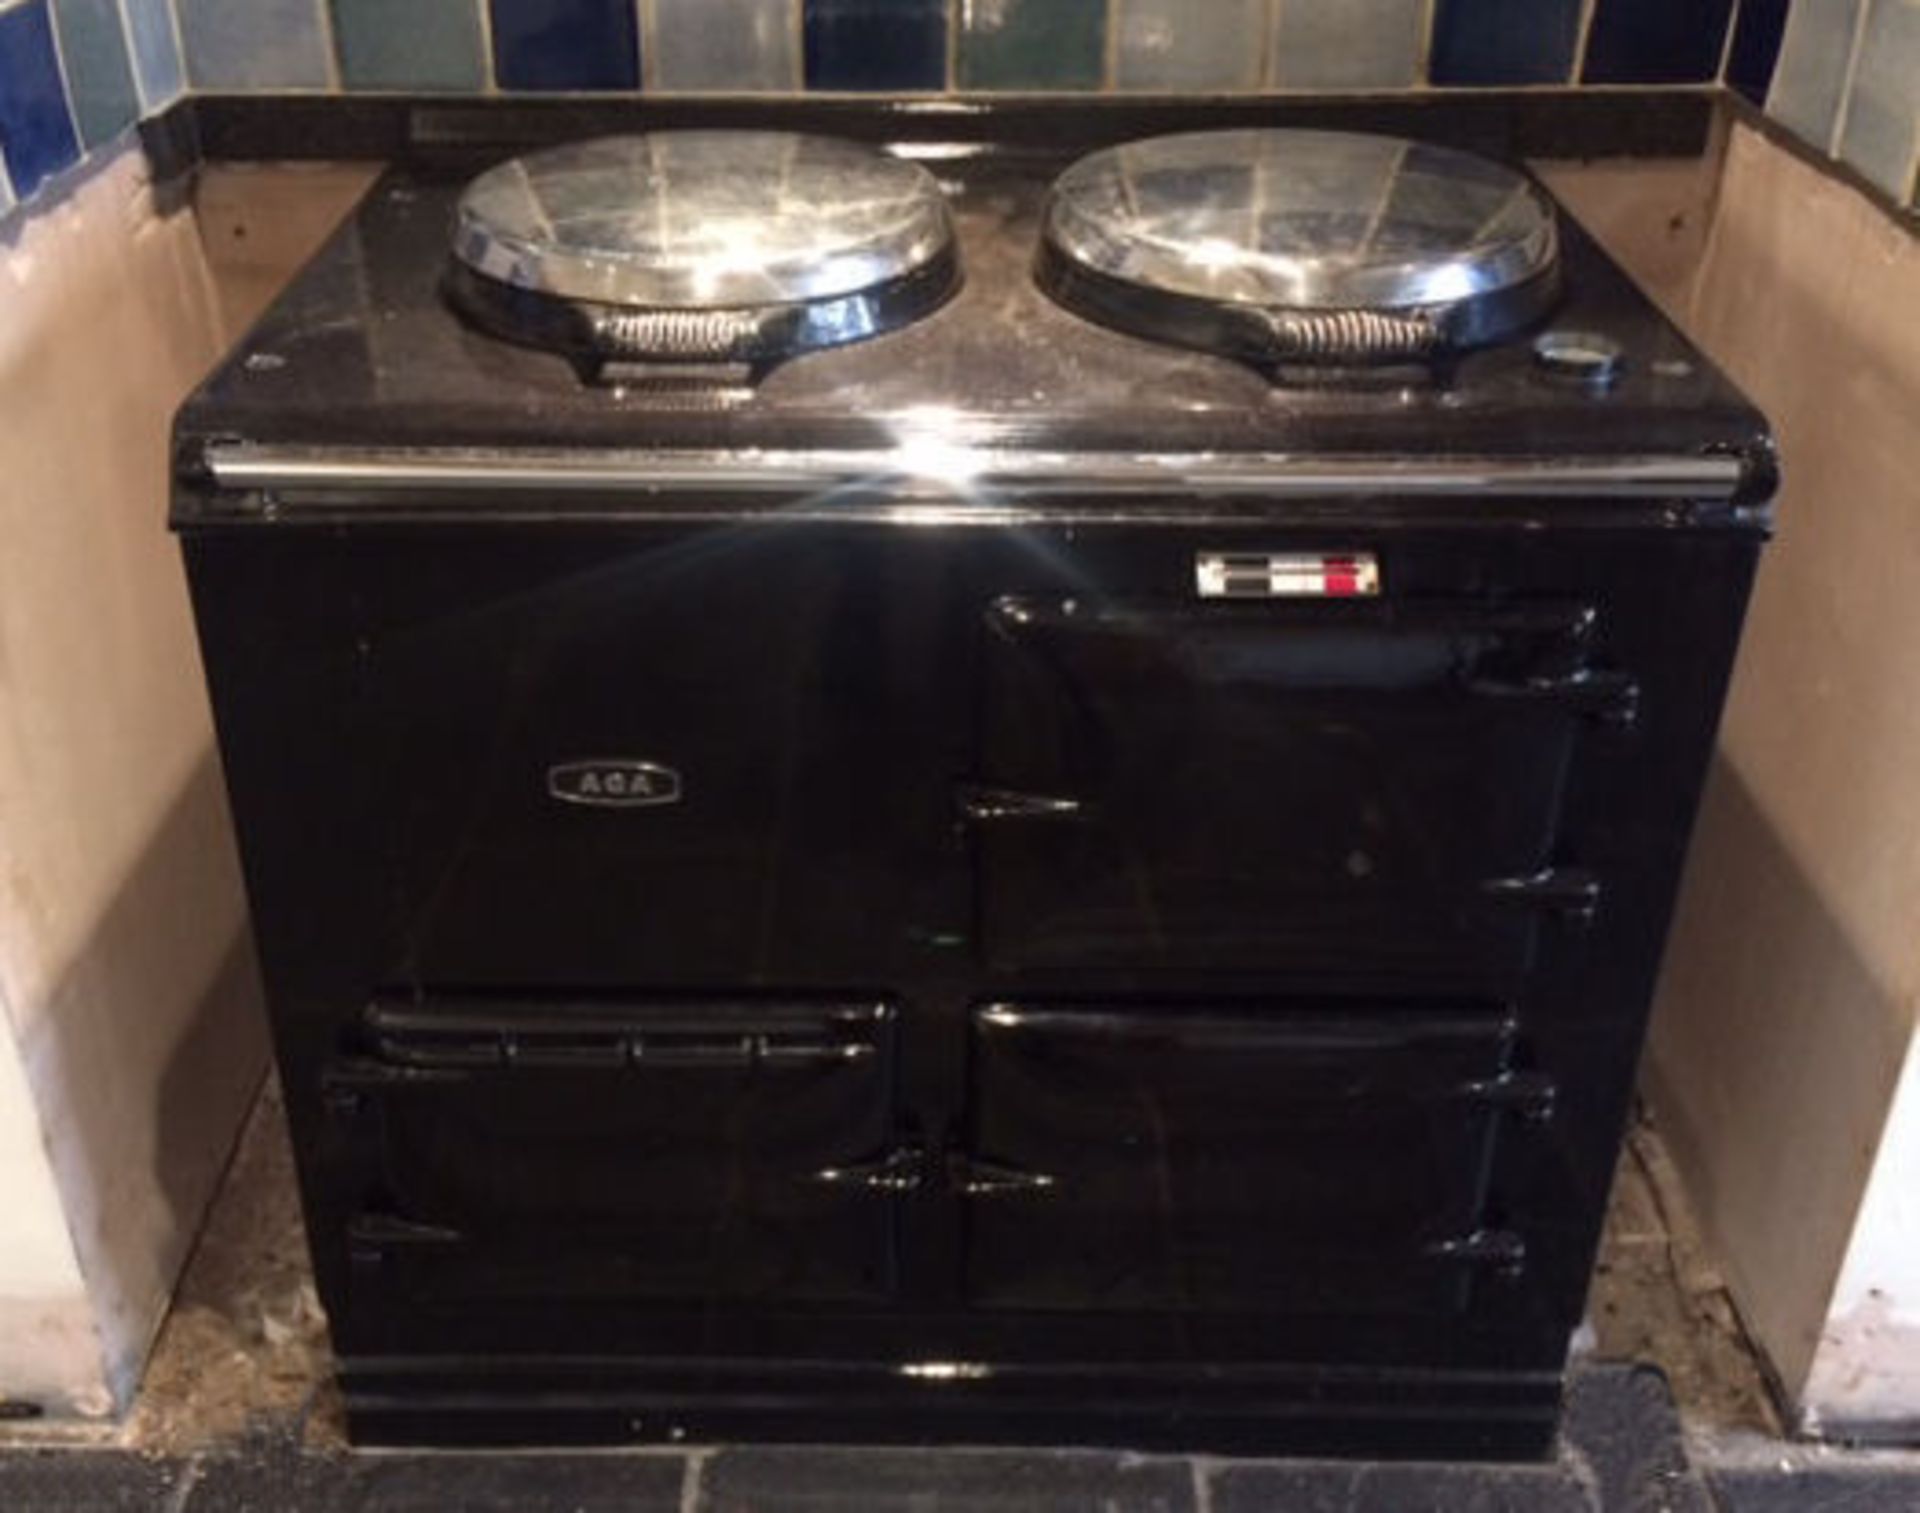 1 x Aga 2-Oven Gas Range Cooker - Cast Iron With Black Enamel Finish - Preowned In Good Working Cond